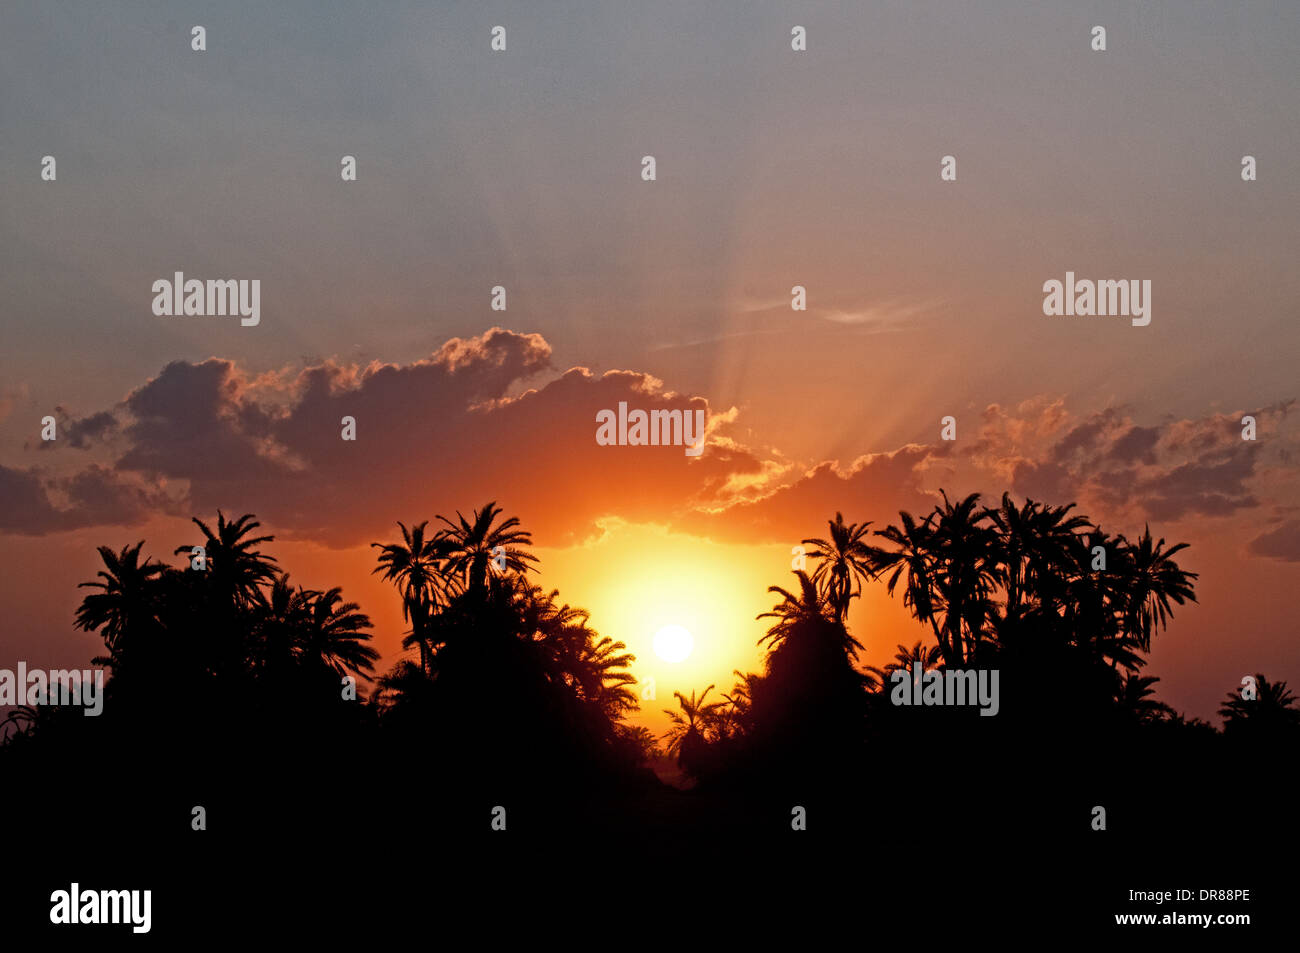 Palm trees silhouetted against orange sun and sunset sky in Amboseli National Park Kenya East Africa Stock Photo